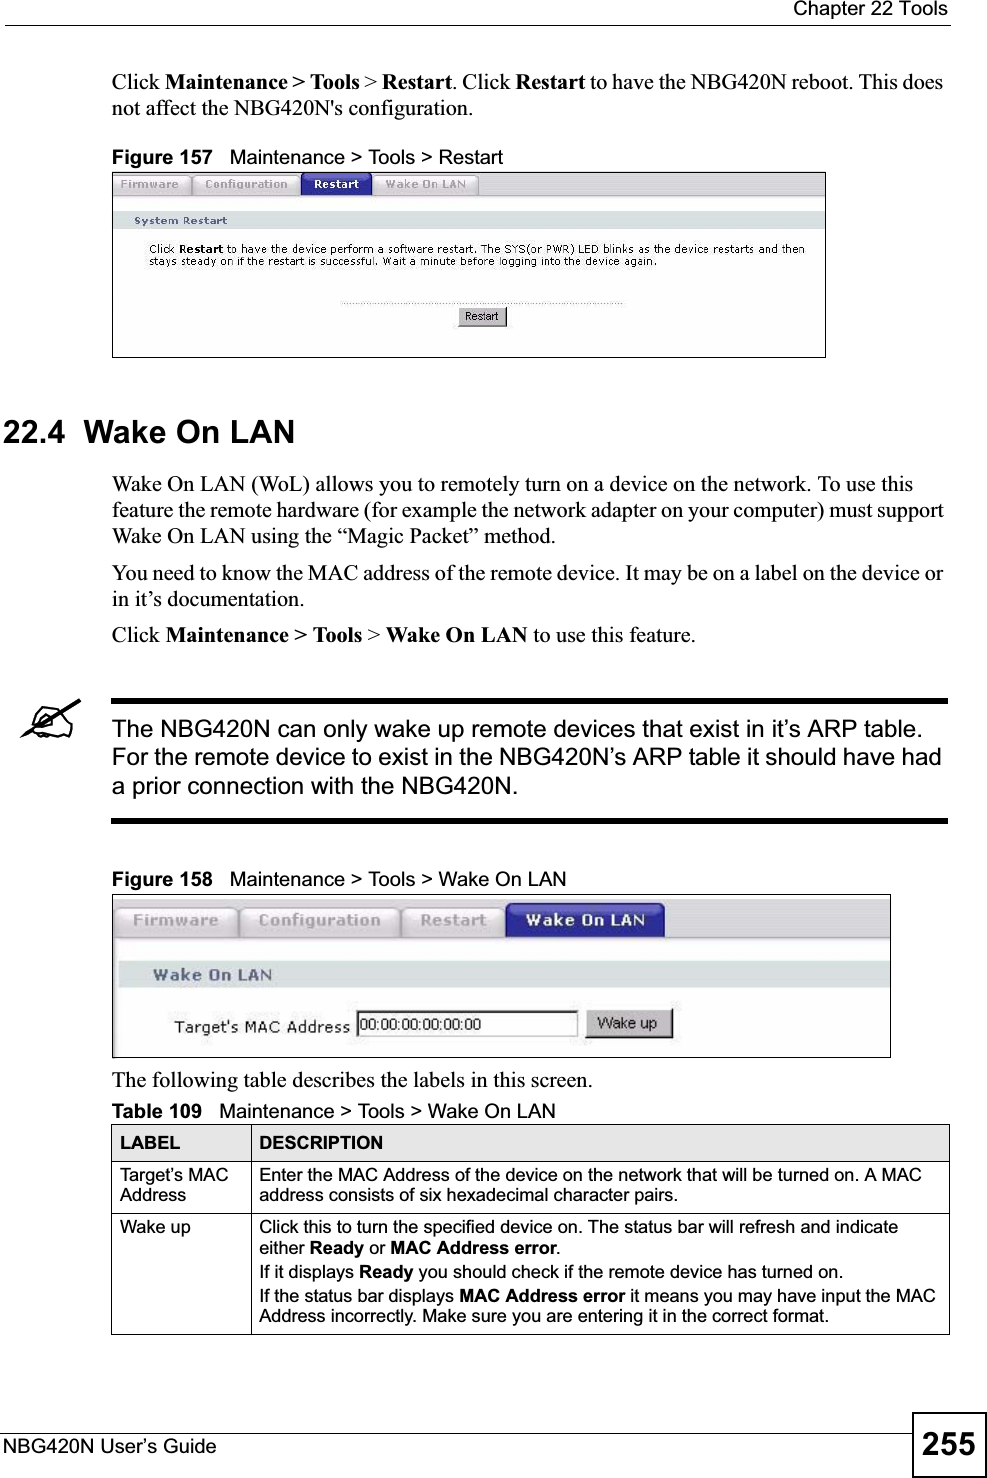  Chapter 22 ToolsNBG420N User’s Guide 255Click Maintenance &gt; Tools &gt; Restart. Click Restart to have the NBG420N reboot. This does not affect the NBG420N&apos;s configuration.Figure 157   Maintenance &gt; Tools &gt; Restart 22.4  Wake On LANWake On LAN (WoL) allows you to remotely turn on a device on the network. To use this feature the remote hardware (for example the network adapter on your computer) must support Wake On LAN using the “Magic Packet” method.You need to know the MAC address of the remote device. It may be on a label on the device or in it’s documentation.Click Maintenance &gt; Tools &gt; Wake On LAN to use this feature.&quot;The NBG420N can only wake up remote devices that exist in it’s ARP table. For the remote device to exist in the NBG420N’s ARP table it should have had a prior connection with the NBG420N.Figure 158   Maintenance &gt; Tools &gt; Wake On LAN The following table describes the labels in this screen.Table 109   Maintenance &gt; Tools &gt; Wake On LAN LABEL DESCRIPTIONTarget’s MAC AddressEnter the MAC Address of the device on the network that will be turned on. A MAC address consists of six hexadecimal character pairs.Wake up Click this to turn the specified device on. The status bar will refresh and indicate either Ready or MAC Address error.If it displays Ready you should check if the remote device has turned on.If the status bar displays MAC Address error it means you may have input the MAC Address incorrectly. Make sure you are entering it in the correct format. 